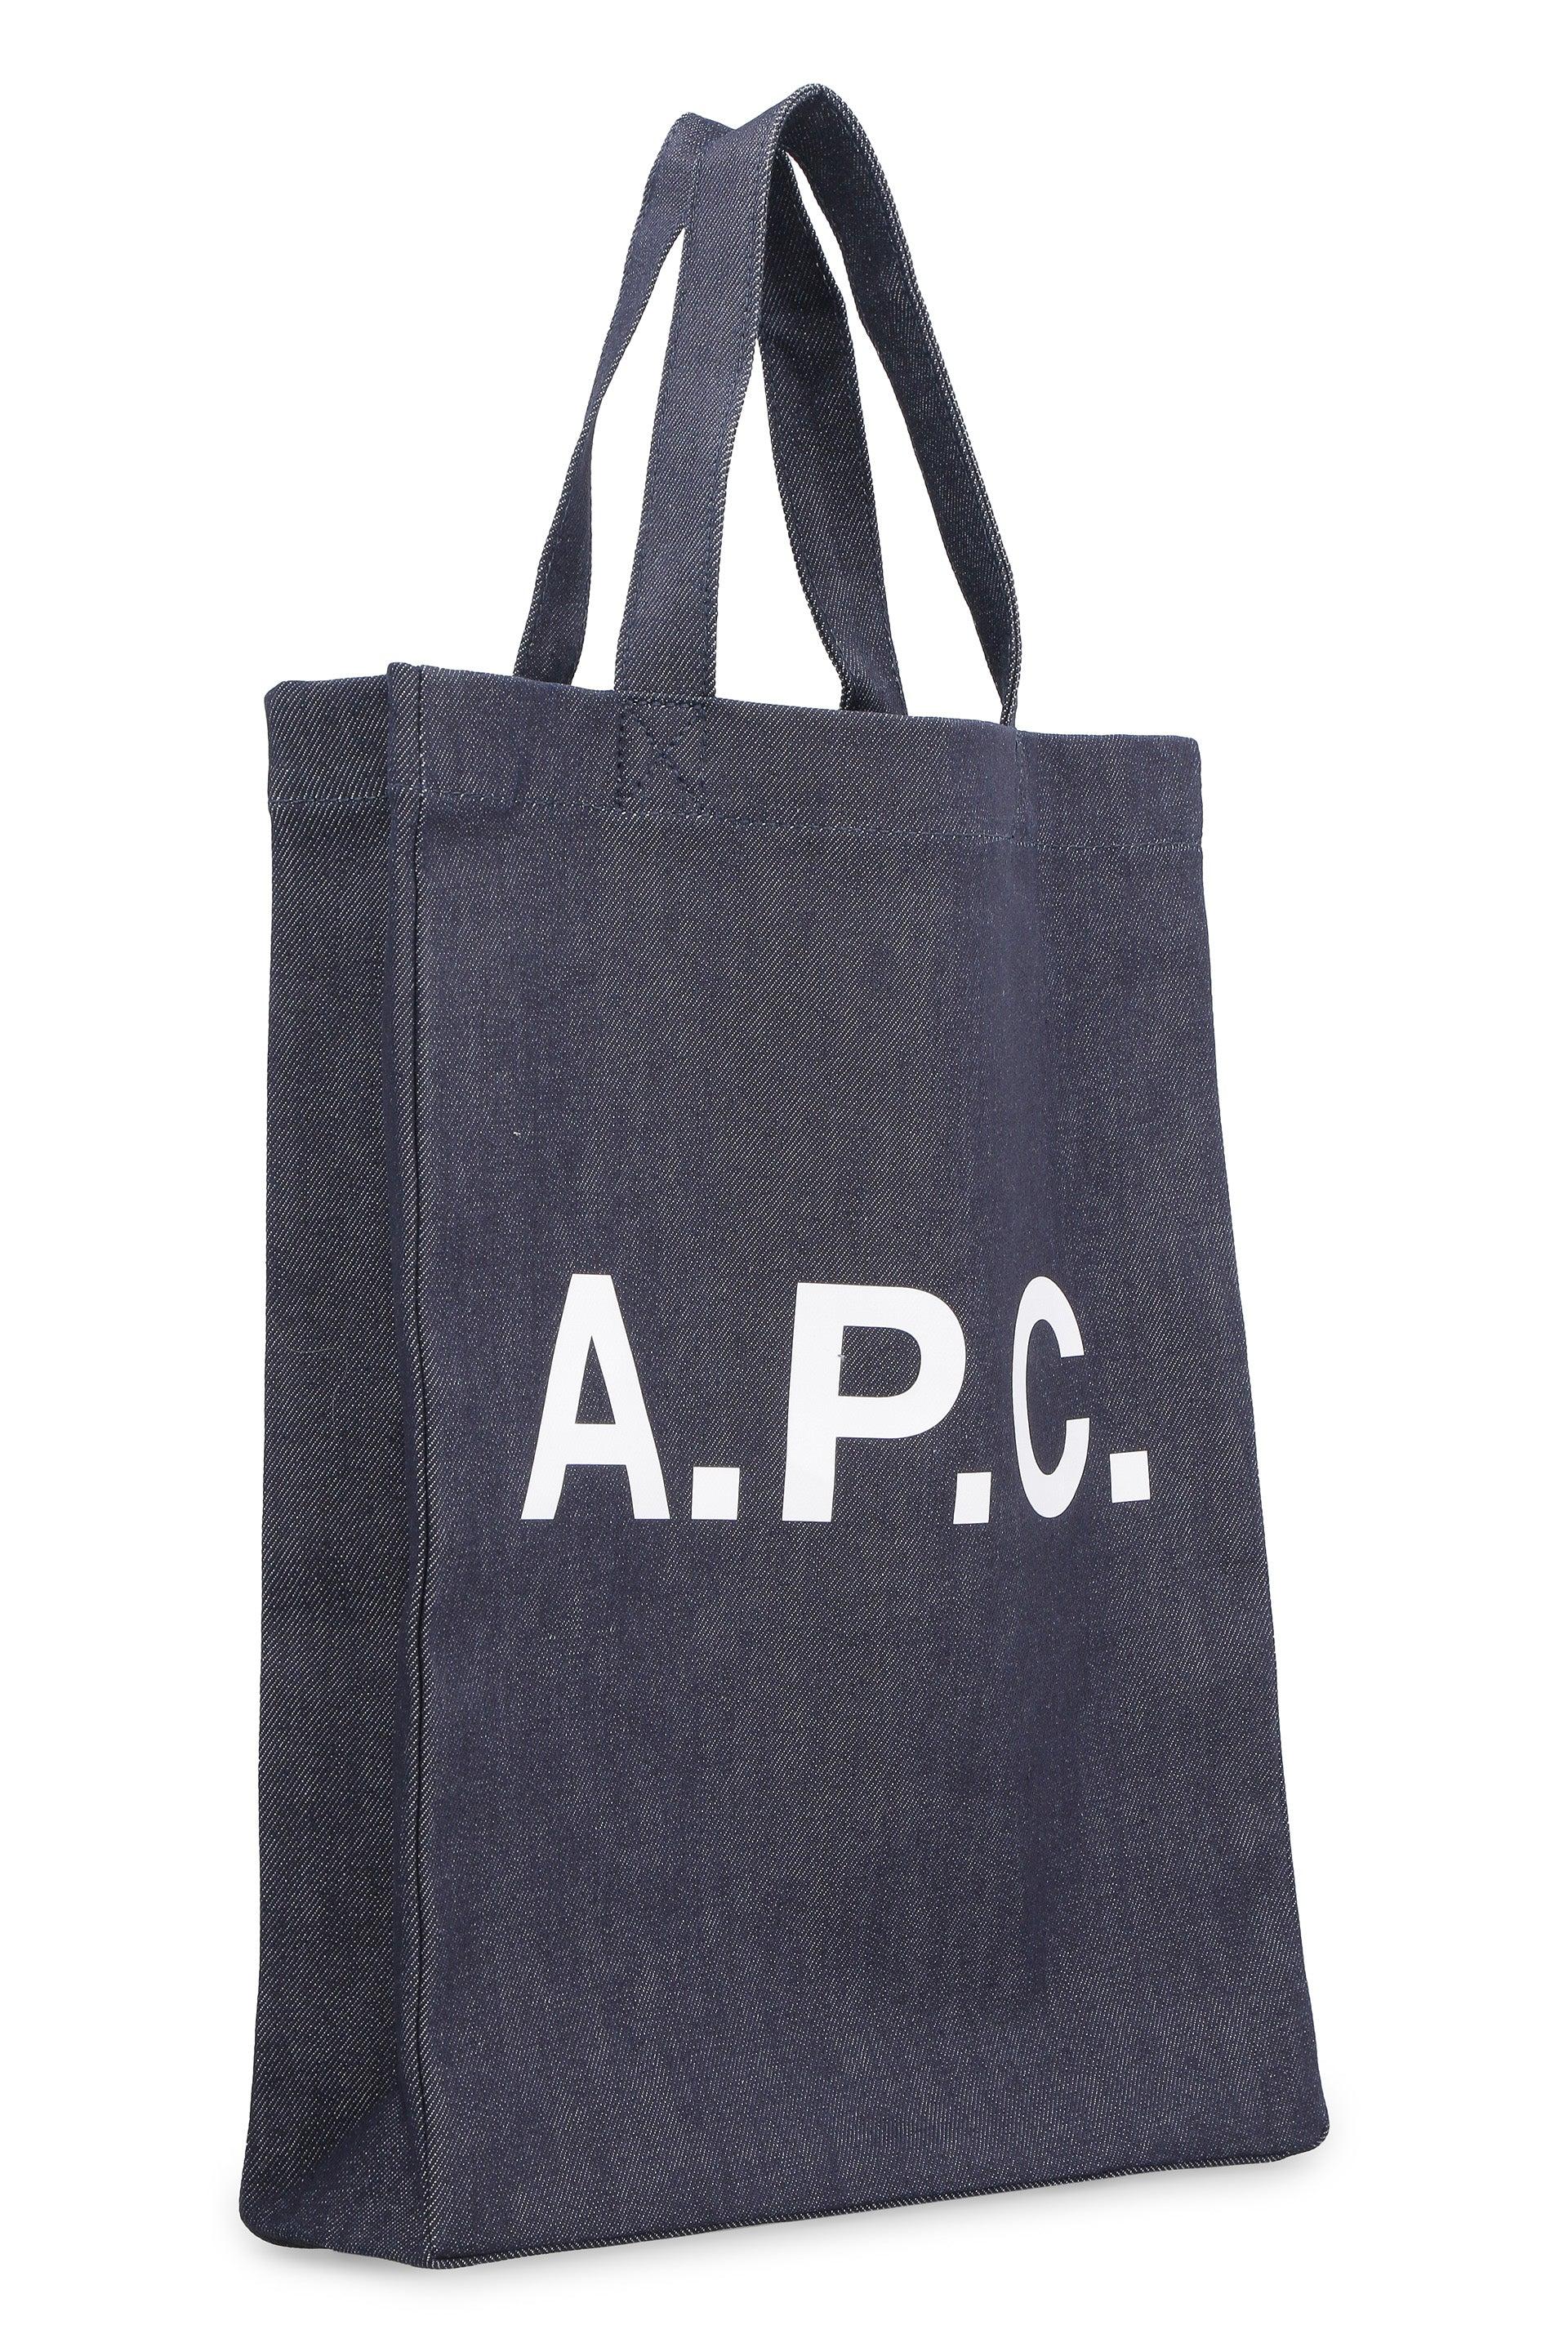 A.P.C. Lou Logo Detail Tote Bag in Blue for Men | Lyst